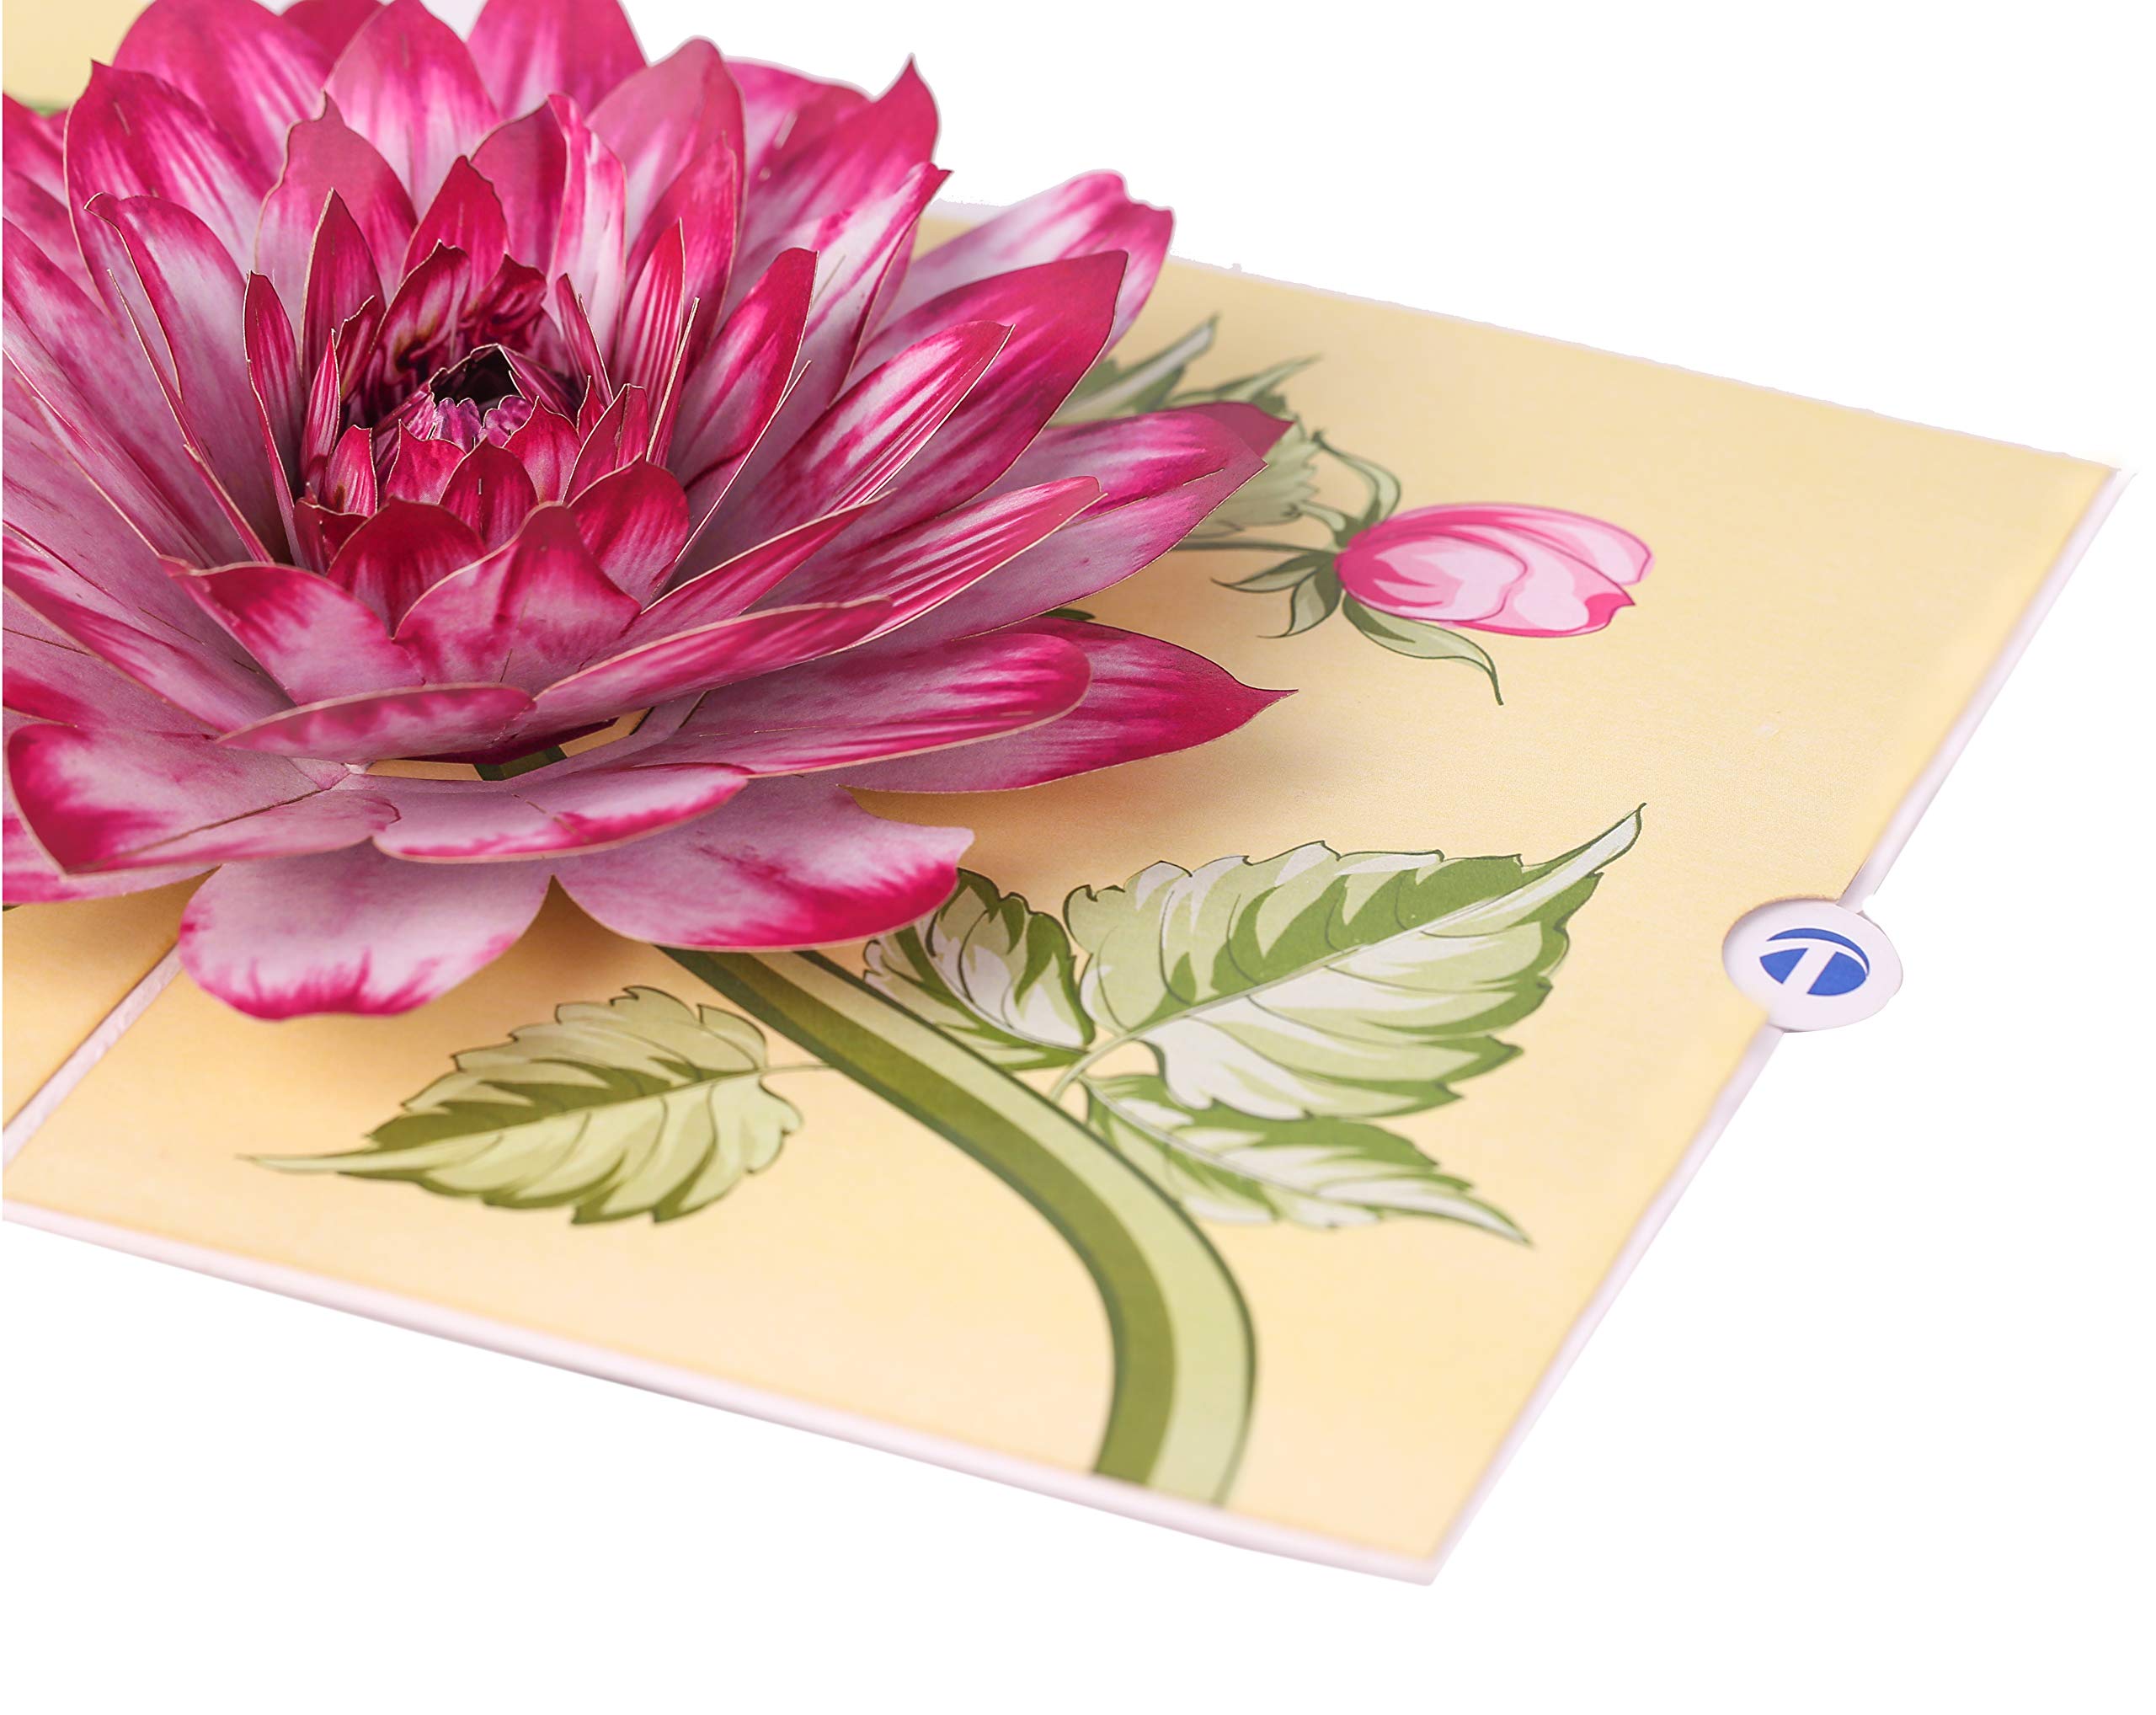 TRUANCE Pop Up Card, Greeting Card, Dahlia Flower, For Mothers Days, Fathers Day, Anniversary Card, Birthday Card, Love Card, Thank You Cards All Occasions